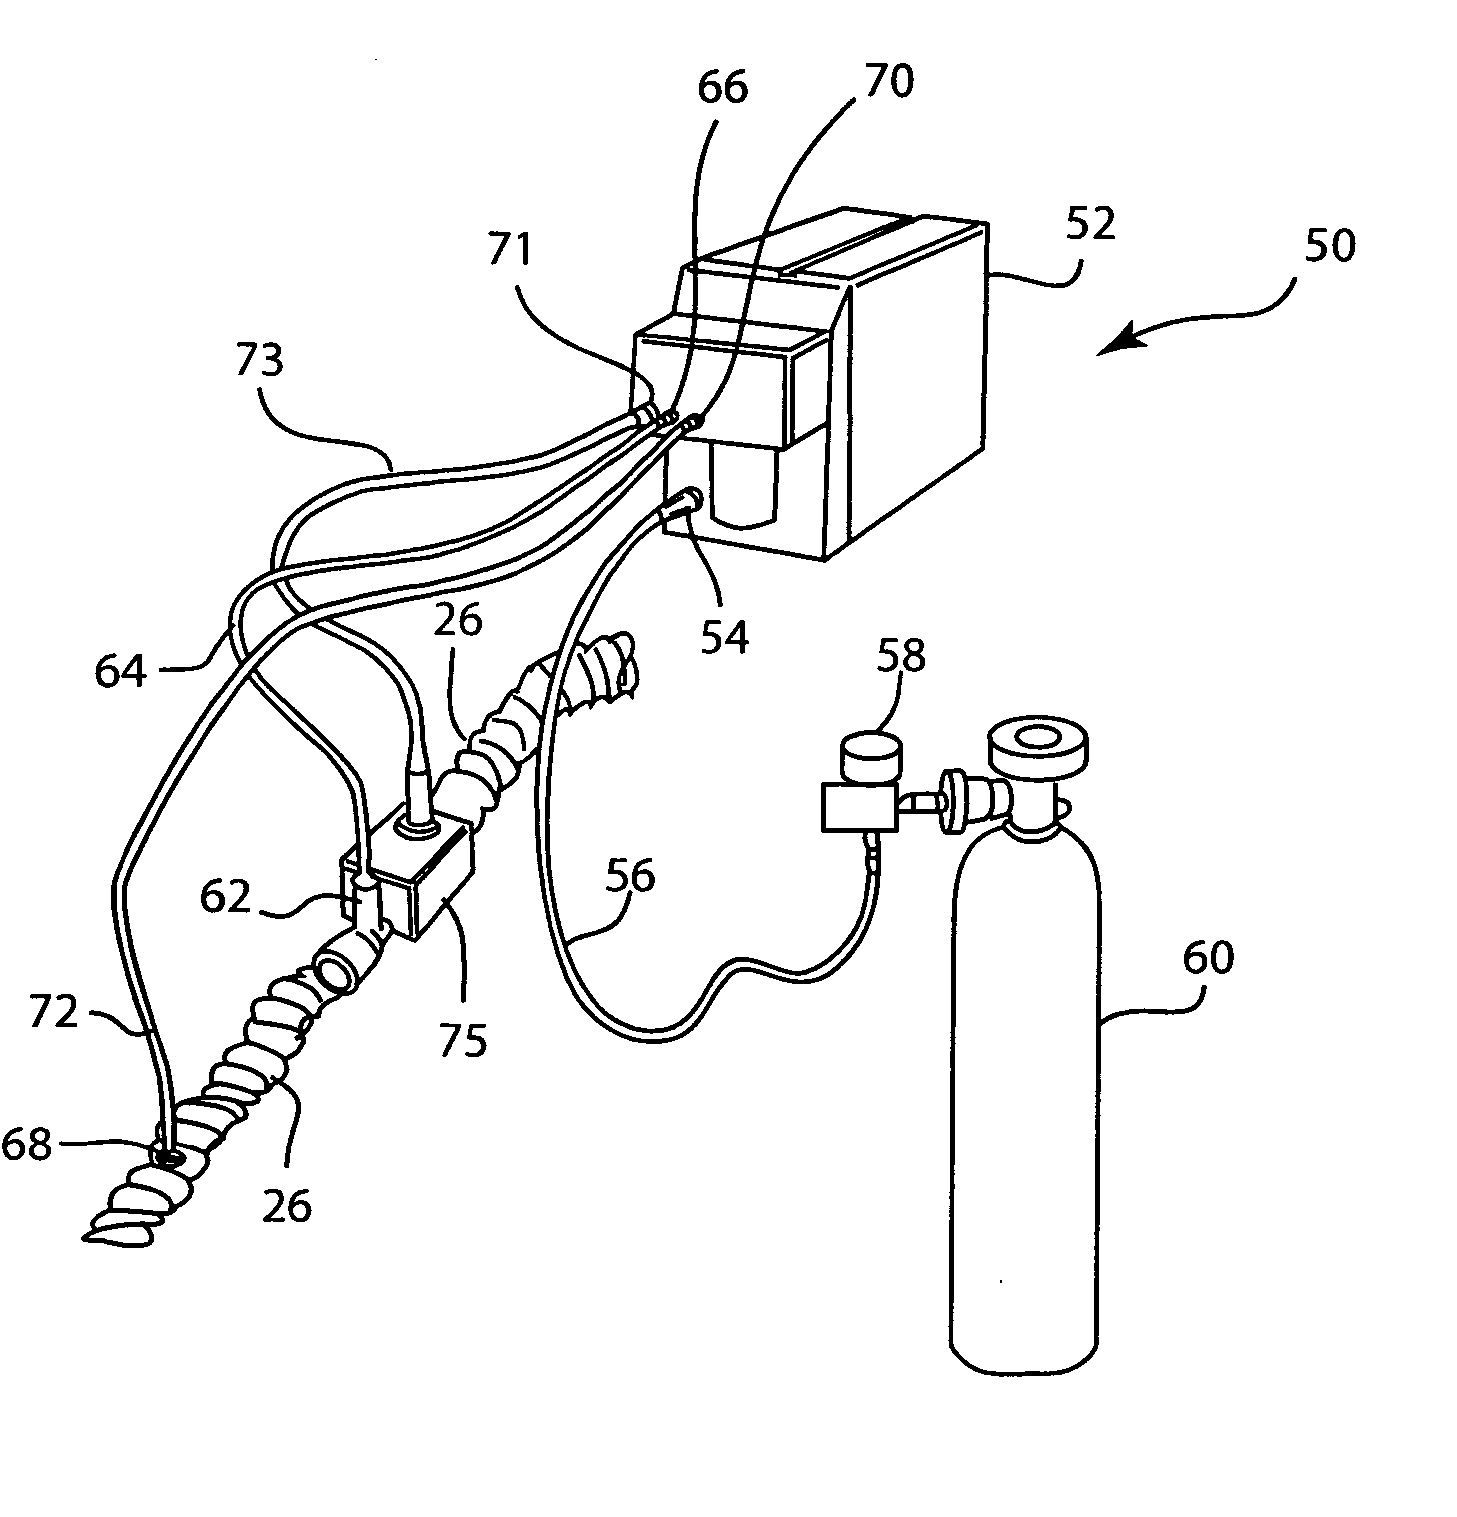 Modular nitric oxide delivery device